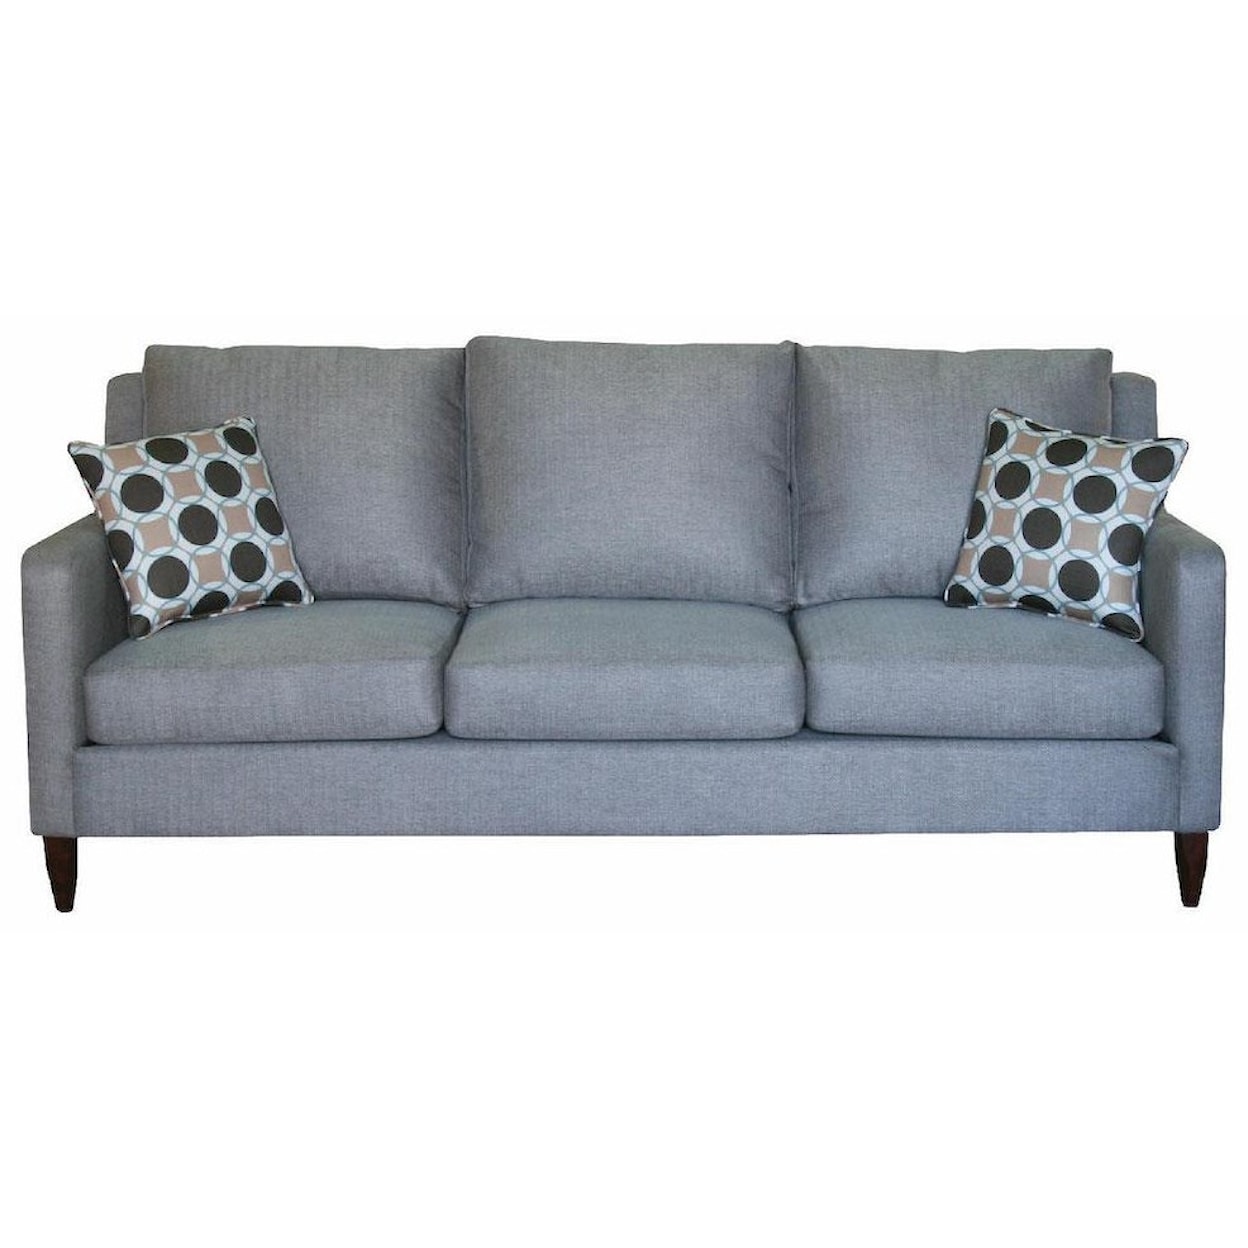 Sussex Upholstery Co. Owen 3 Cushion Sofa